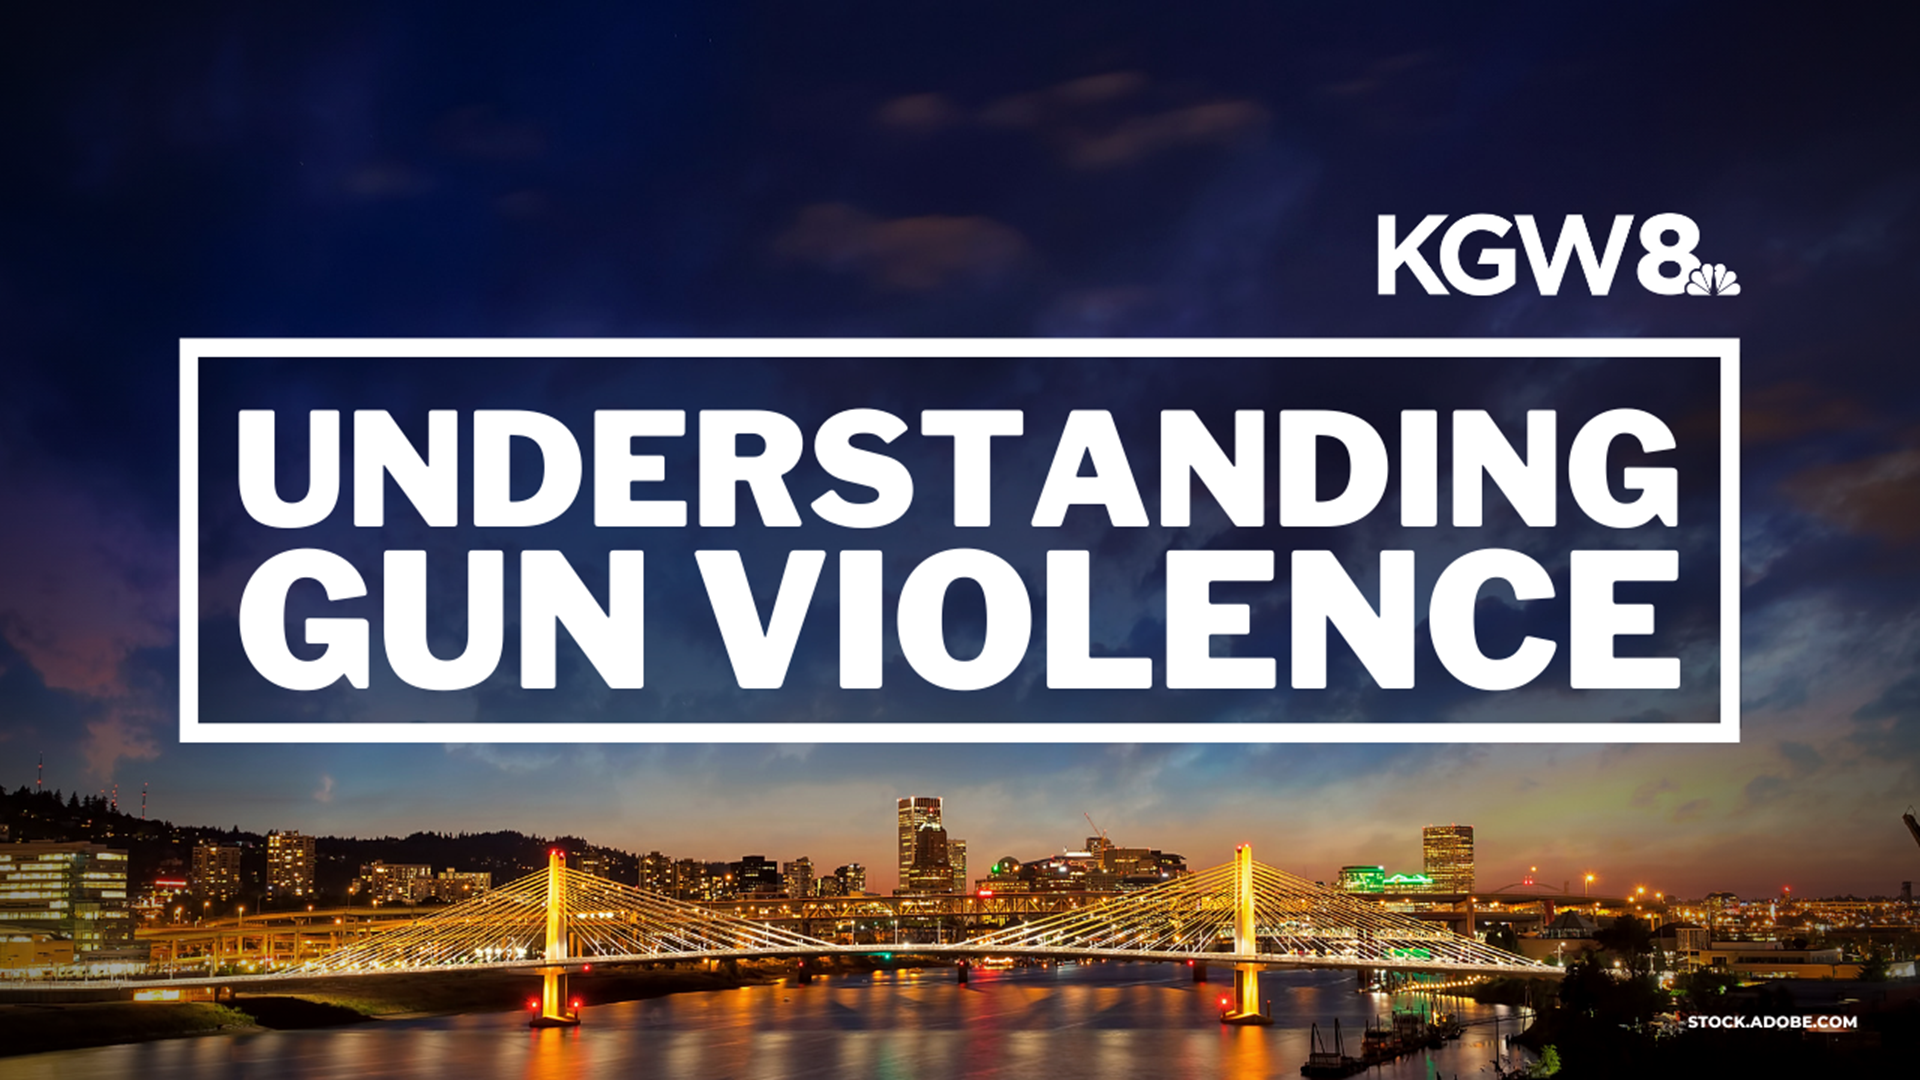 KGW's "The Story" dedicated an entire show to understanding how gun violence traumatizes the community and what can be done to stop the shootings.